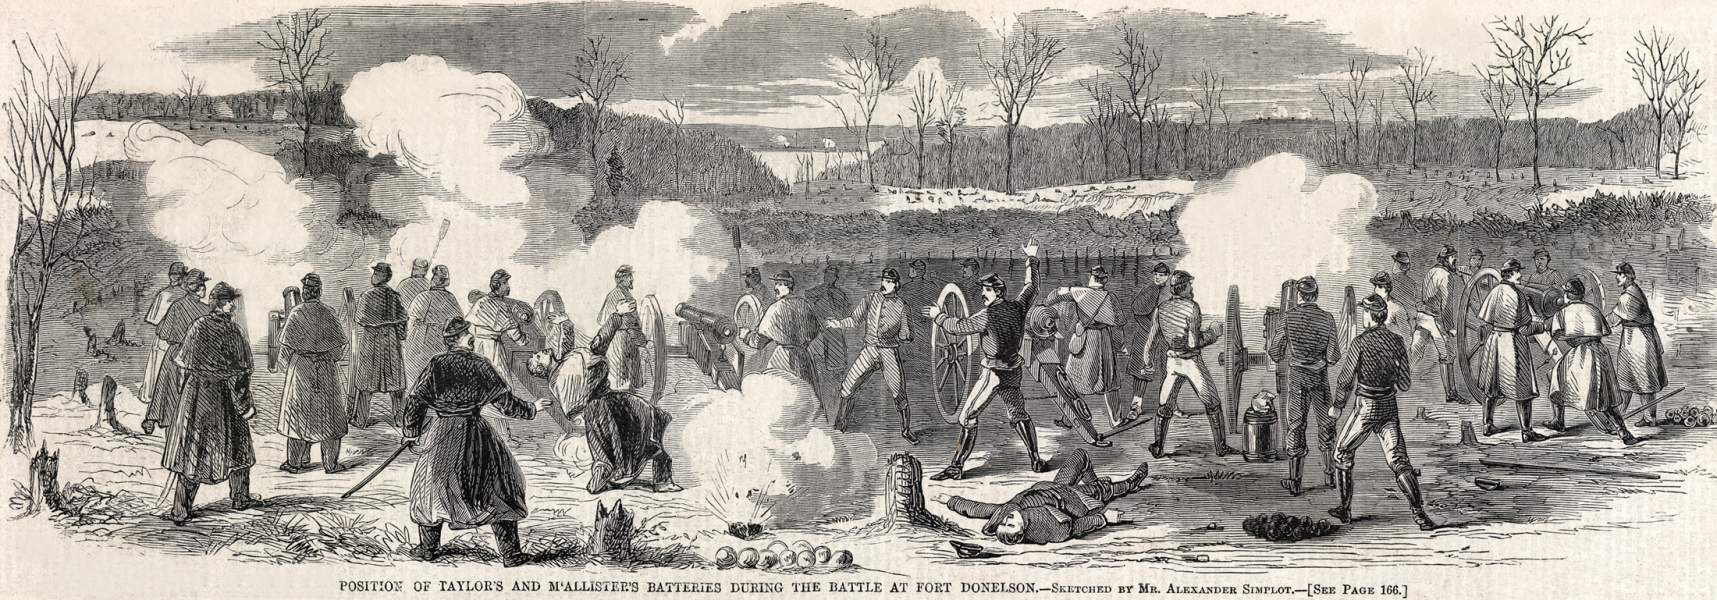 Union Artillery in action at Fort Donelson, Tennessee, February 1862, artist's impression, zoomable image